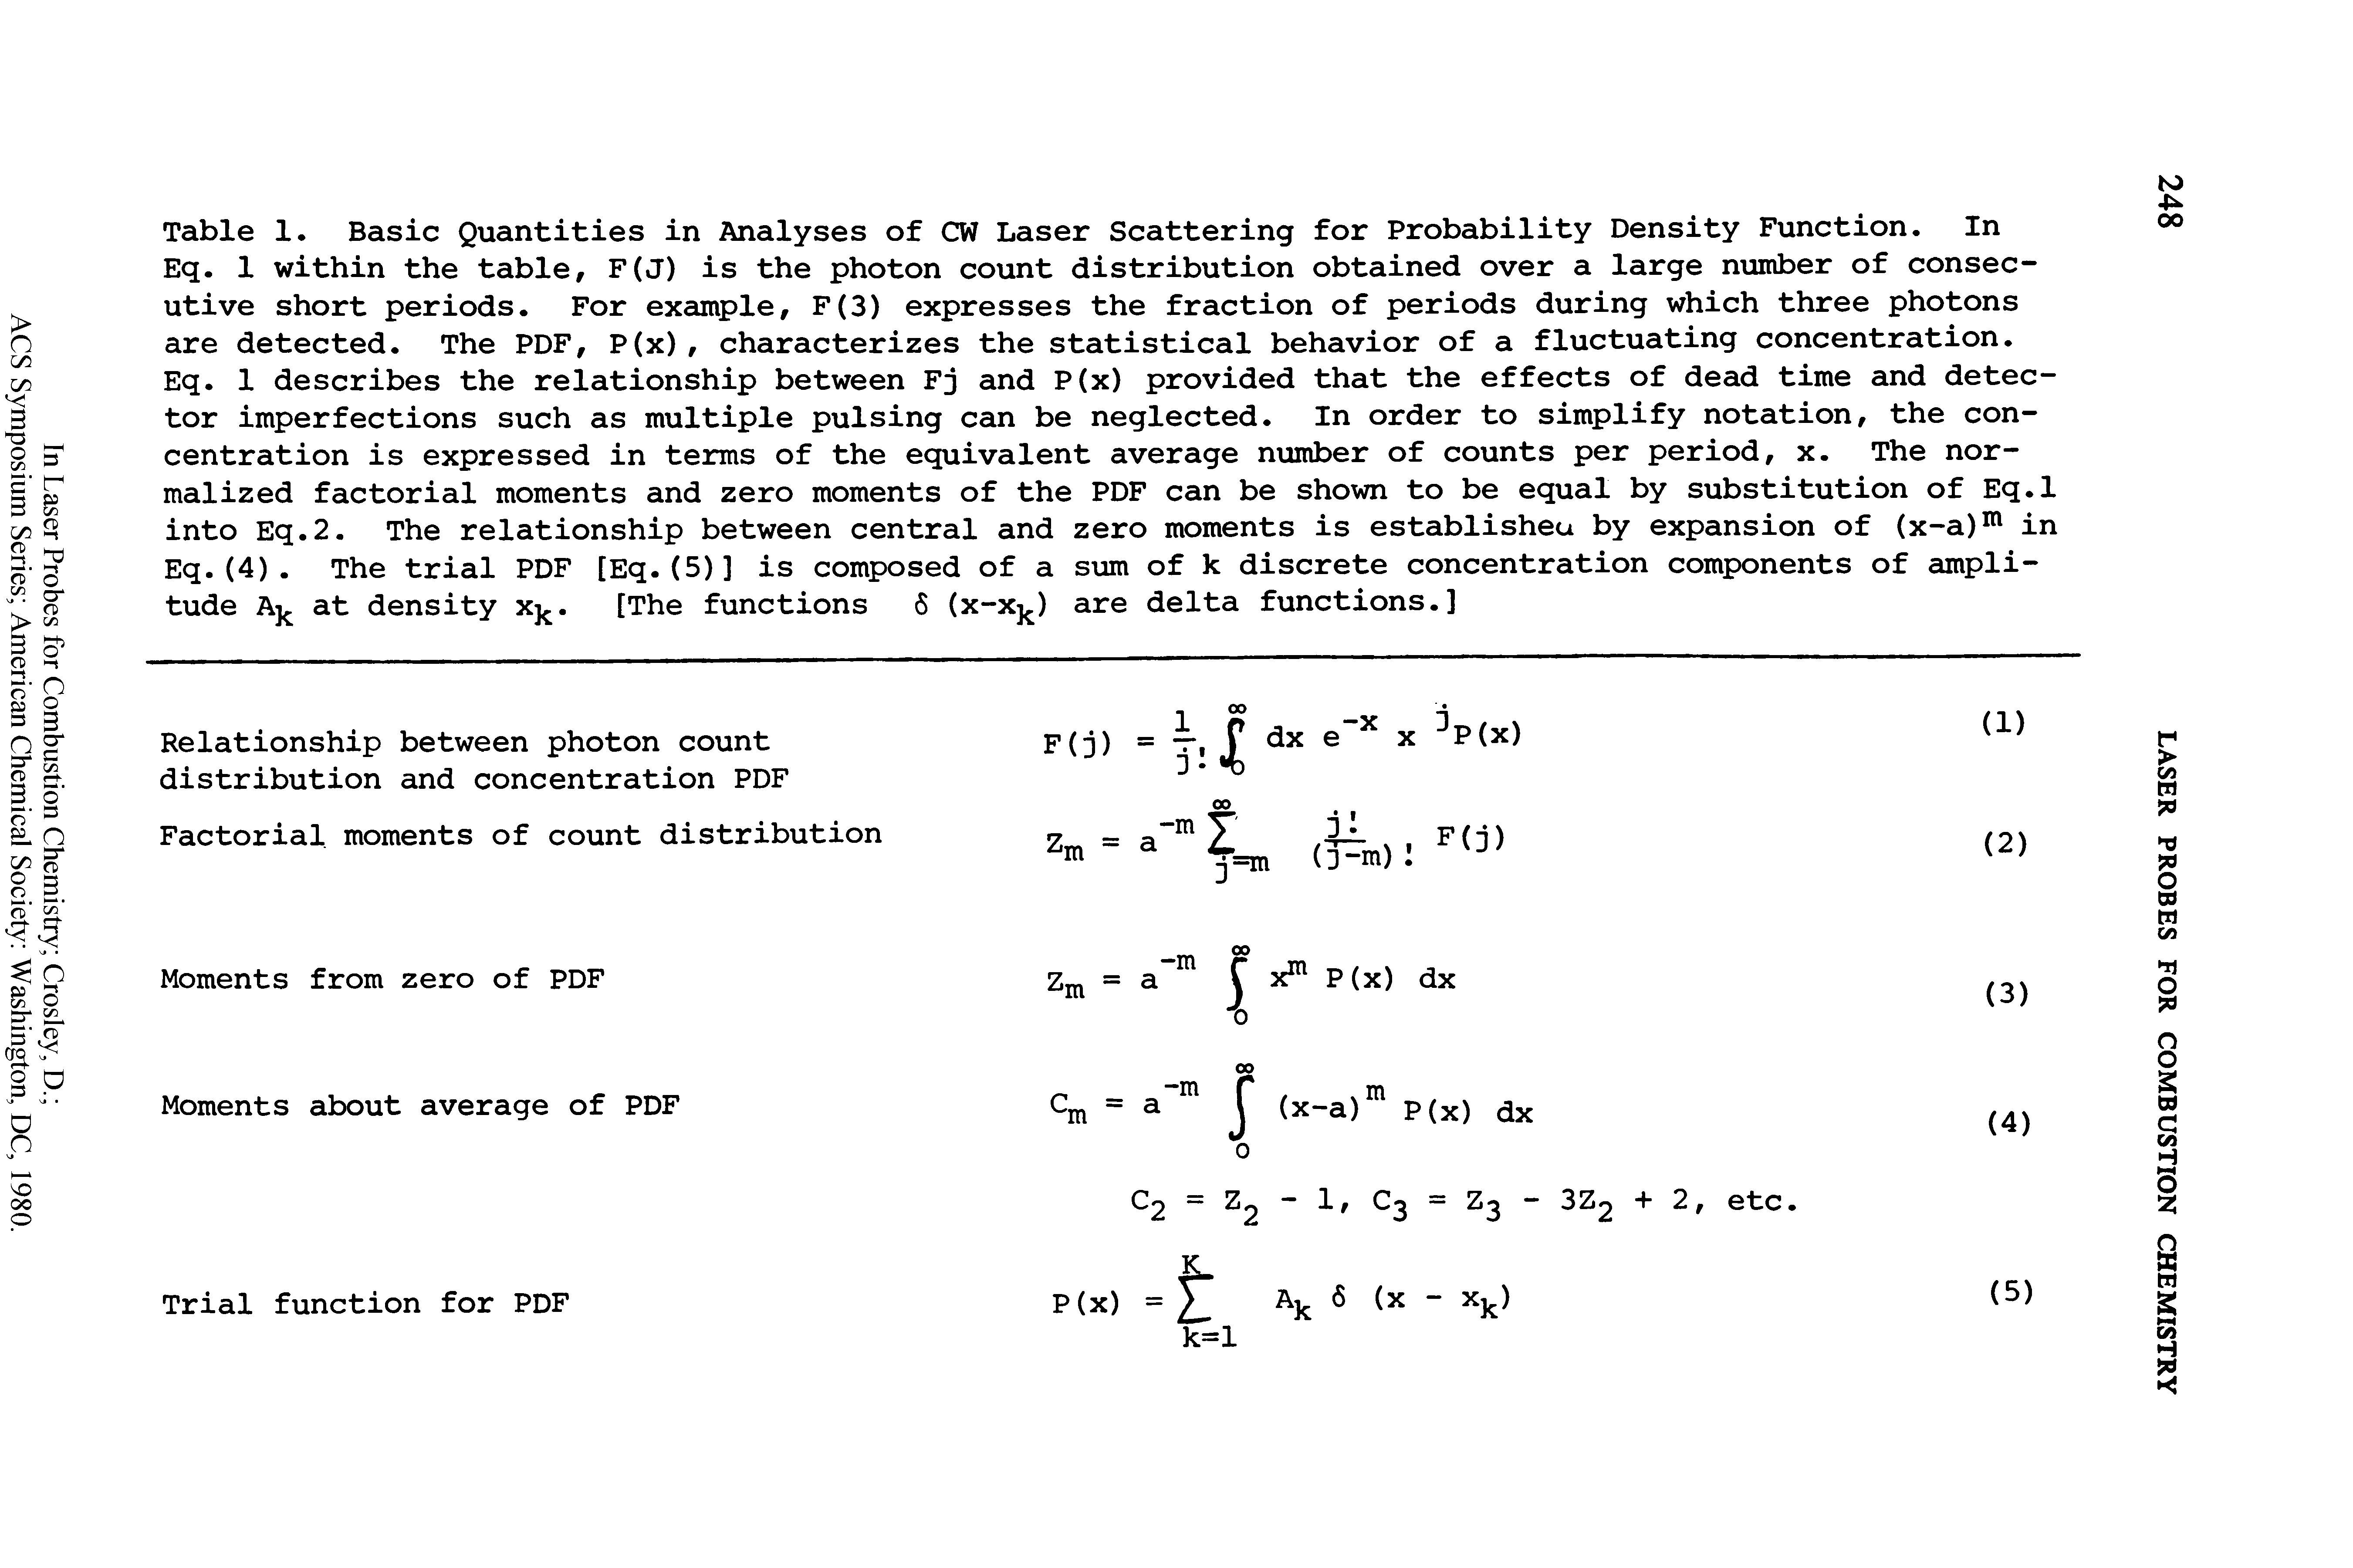 Table 1. Basic Quantities in Analyses of CW Laser Scattering for Probability Density Function. In Eq. 1 within the table, F(J) is the photon count distribution obtained over a large number of consecutive short periods. For example, F(3) expresses the fraction of periods during which three photons are detected. The PDF, P(x), characterizes the statistical behavior of a fluctuating concentration. Eq. 1 describes the relationship between Fj and P(x) provided that the effects of dead time and detector imperfections such as multiple pulsing can be neglected. In order to simplify notation, the concentration is expressed in terms of the equivalent average number of counts per period, x. The normalized factorial moments and zero moments of the PDF can be shown to be equal by substitution of Eq.l into Eq.2. The relationship between central and zero moments is established by expansion of (x-a)m in Eq.(4). The trial PDF [Eq.(5)] is composed of a sum of k discrete concentration components of amplitude Ak at density xk. [The functions 5 (x-xk) are delta functions.]...